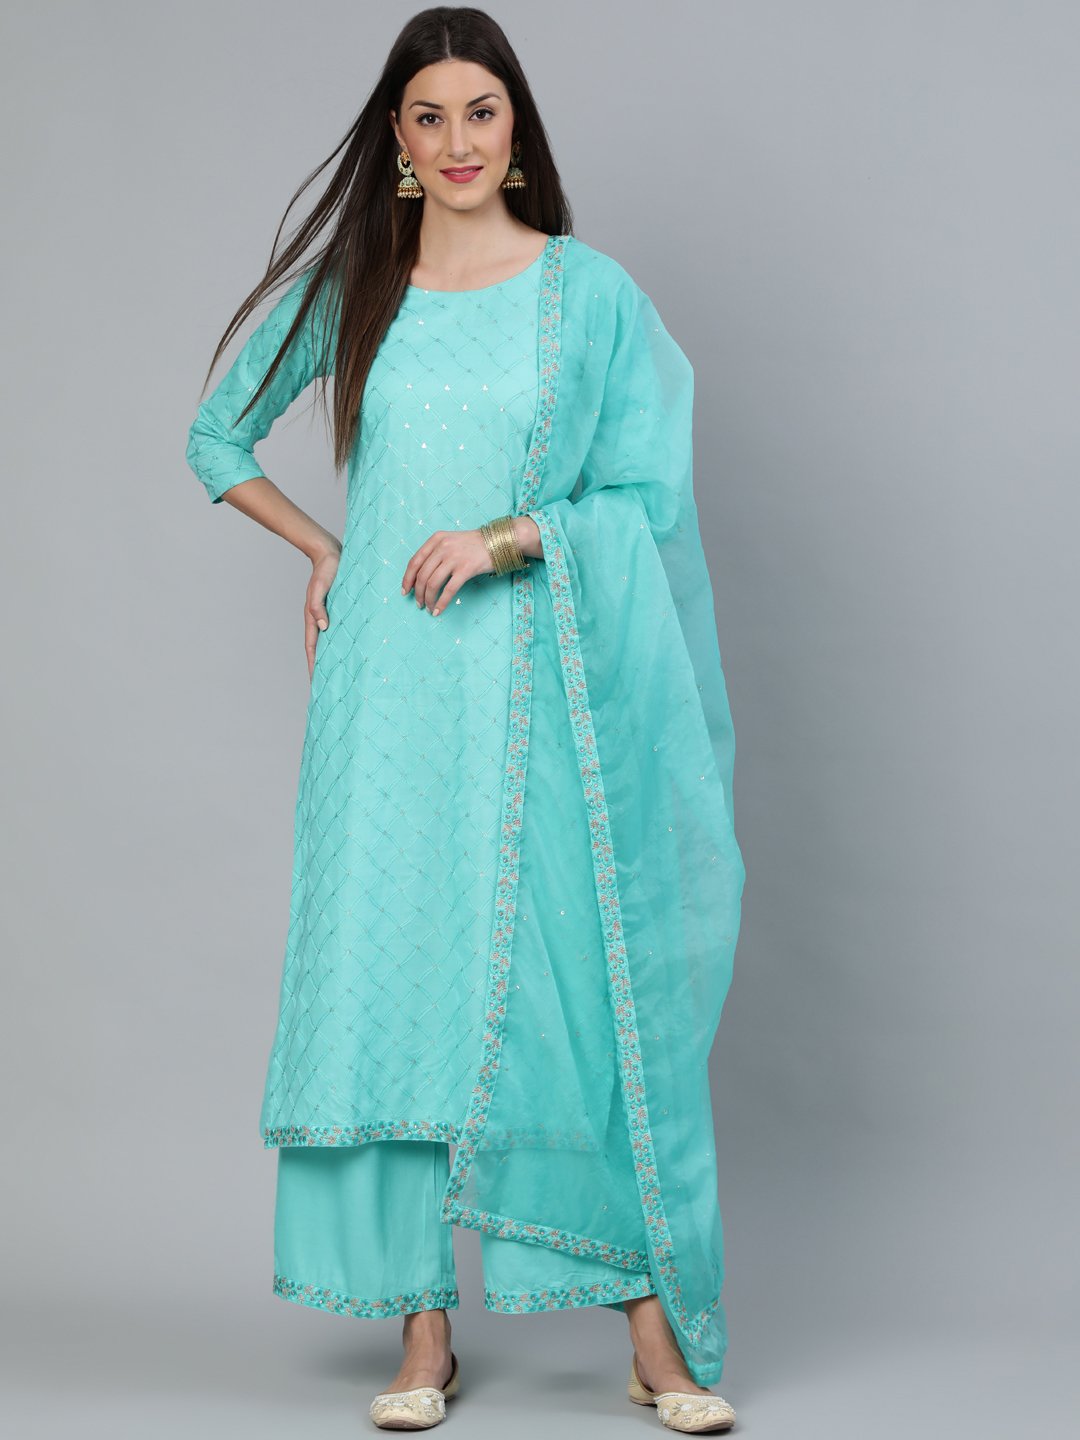 Women's Turquoise Blue Sequence Embroidered Straight Kurta Plazzo With Net Dupatta - Nayo Clothing